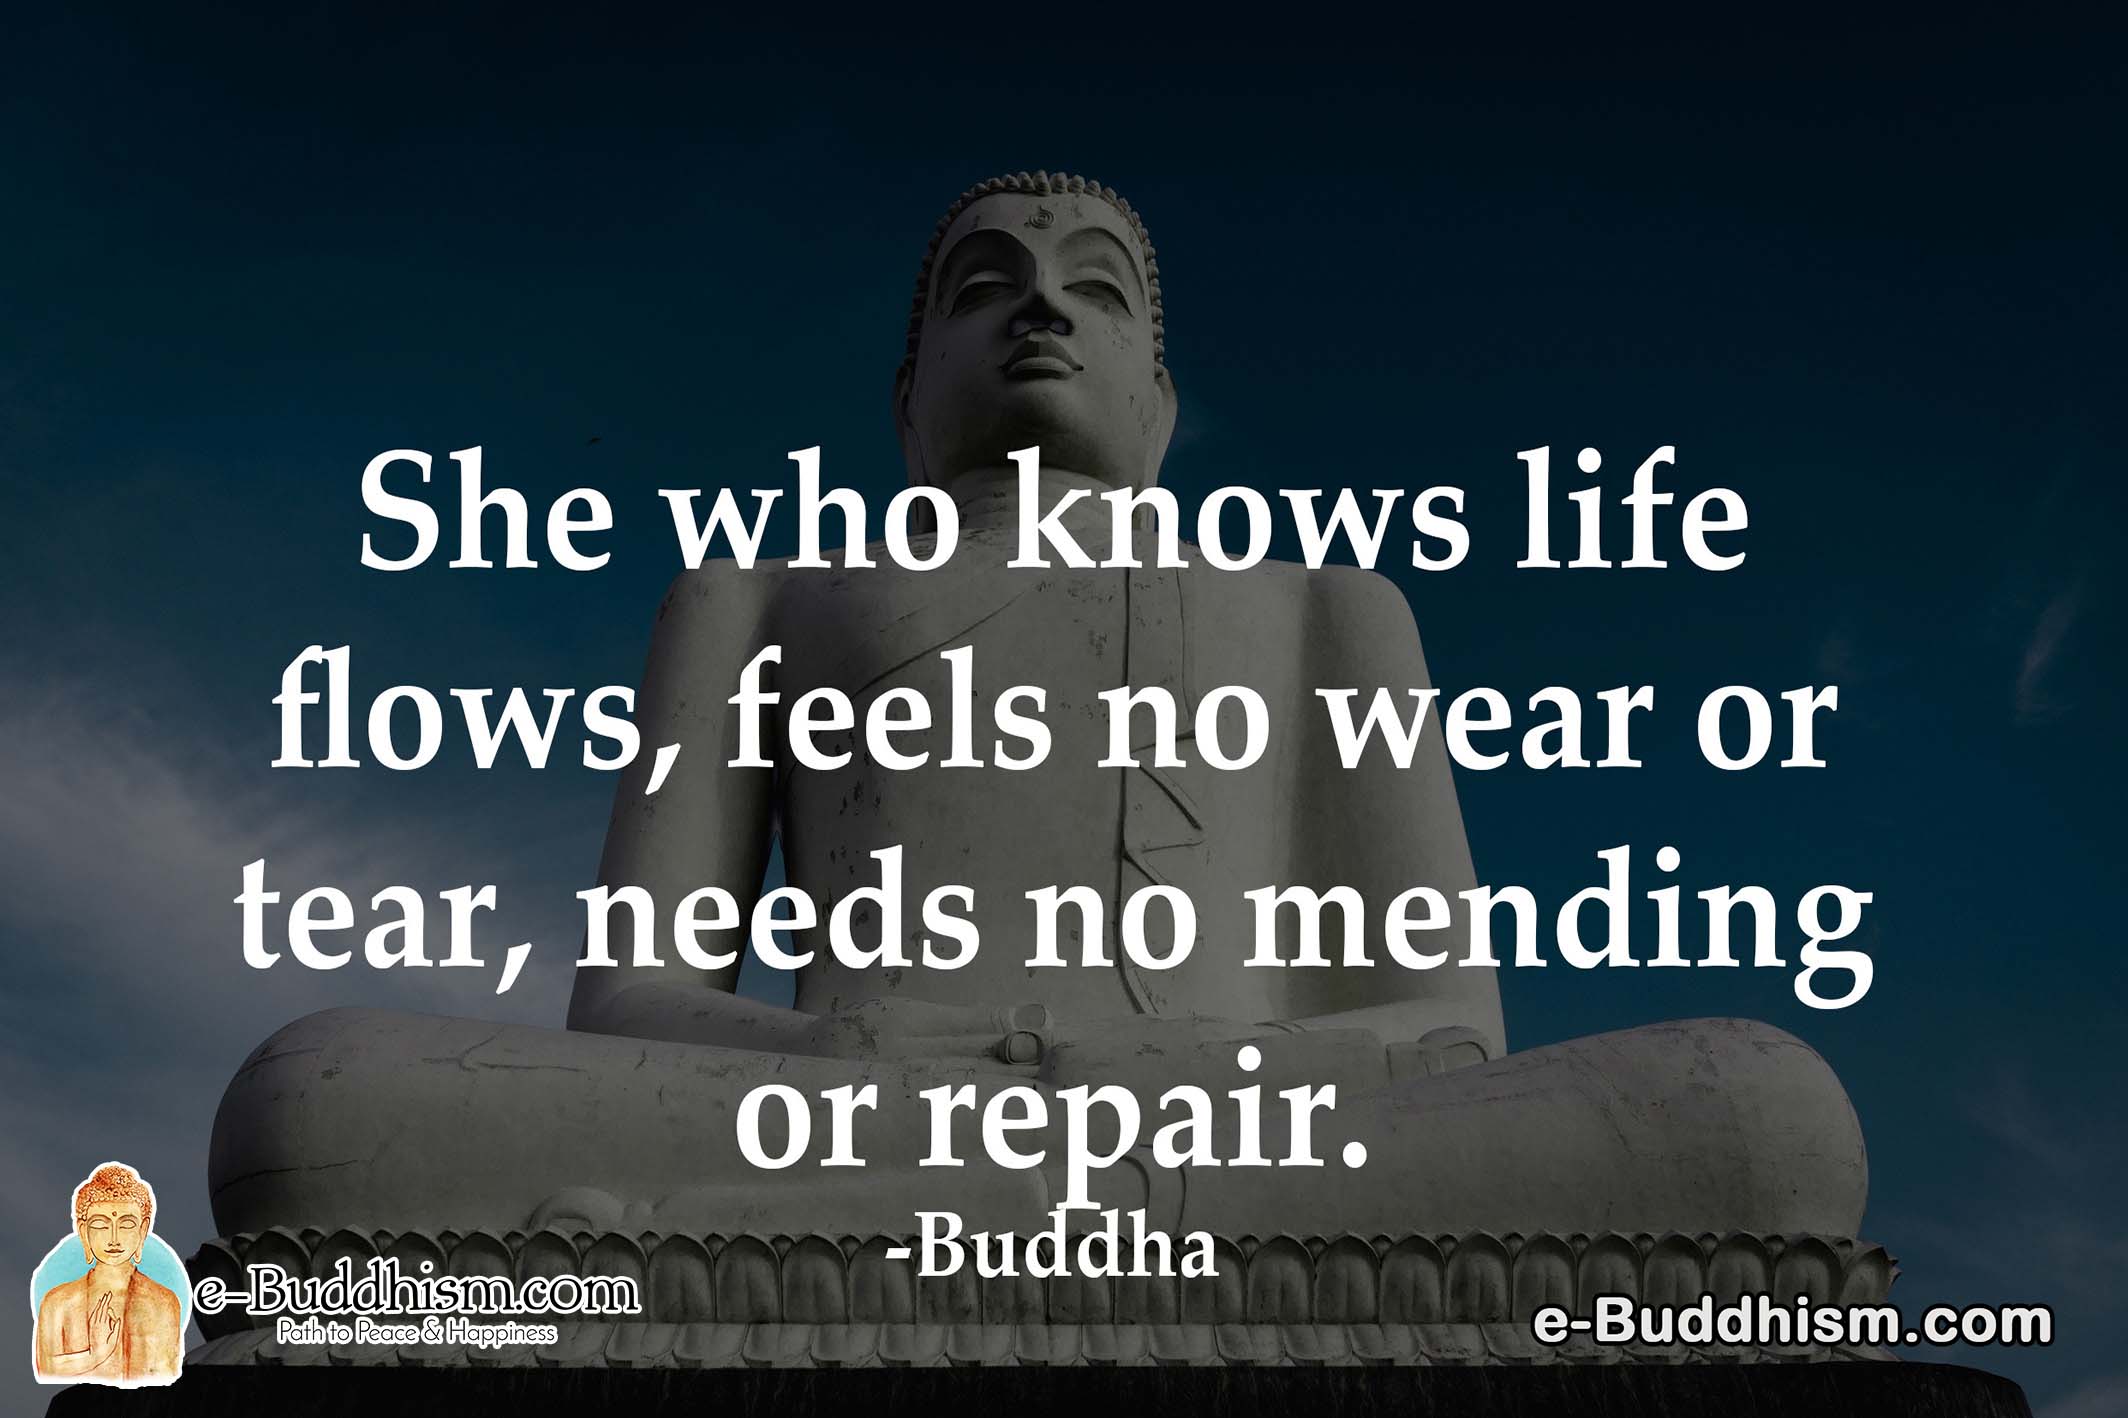 She knows life flows, feels no wear or tear, and needs no mending or repair. -Buddha